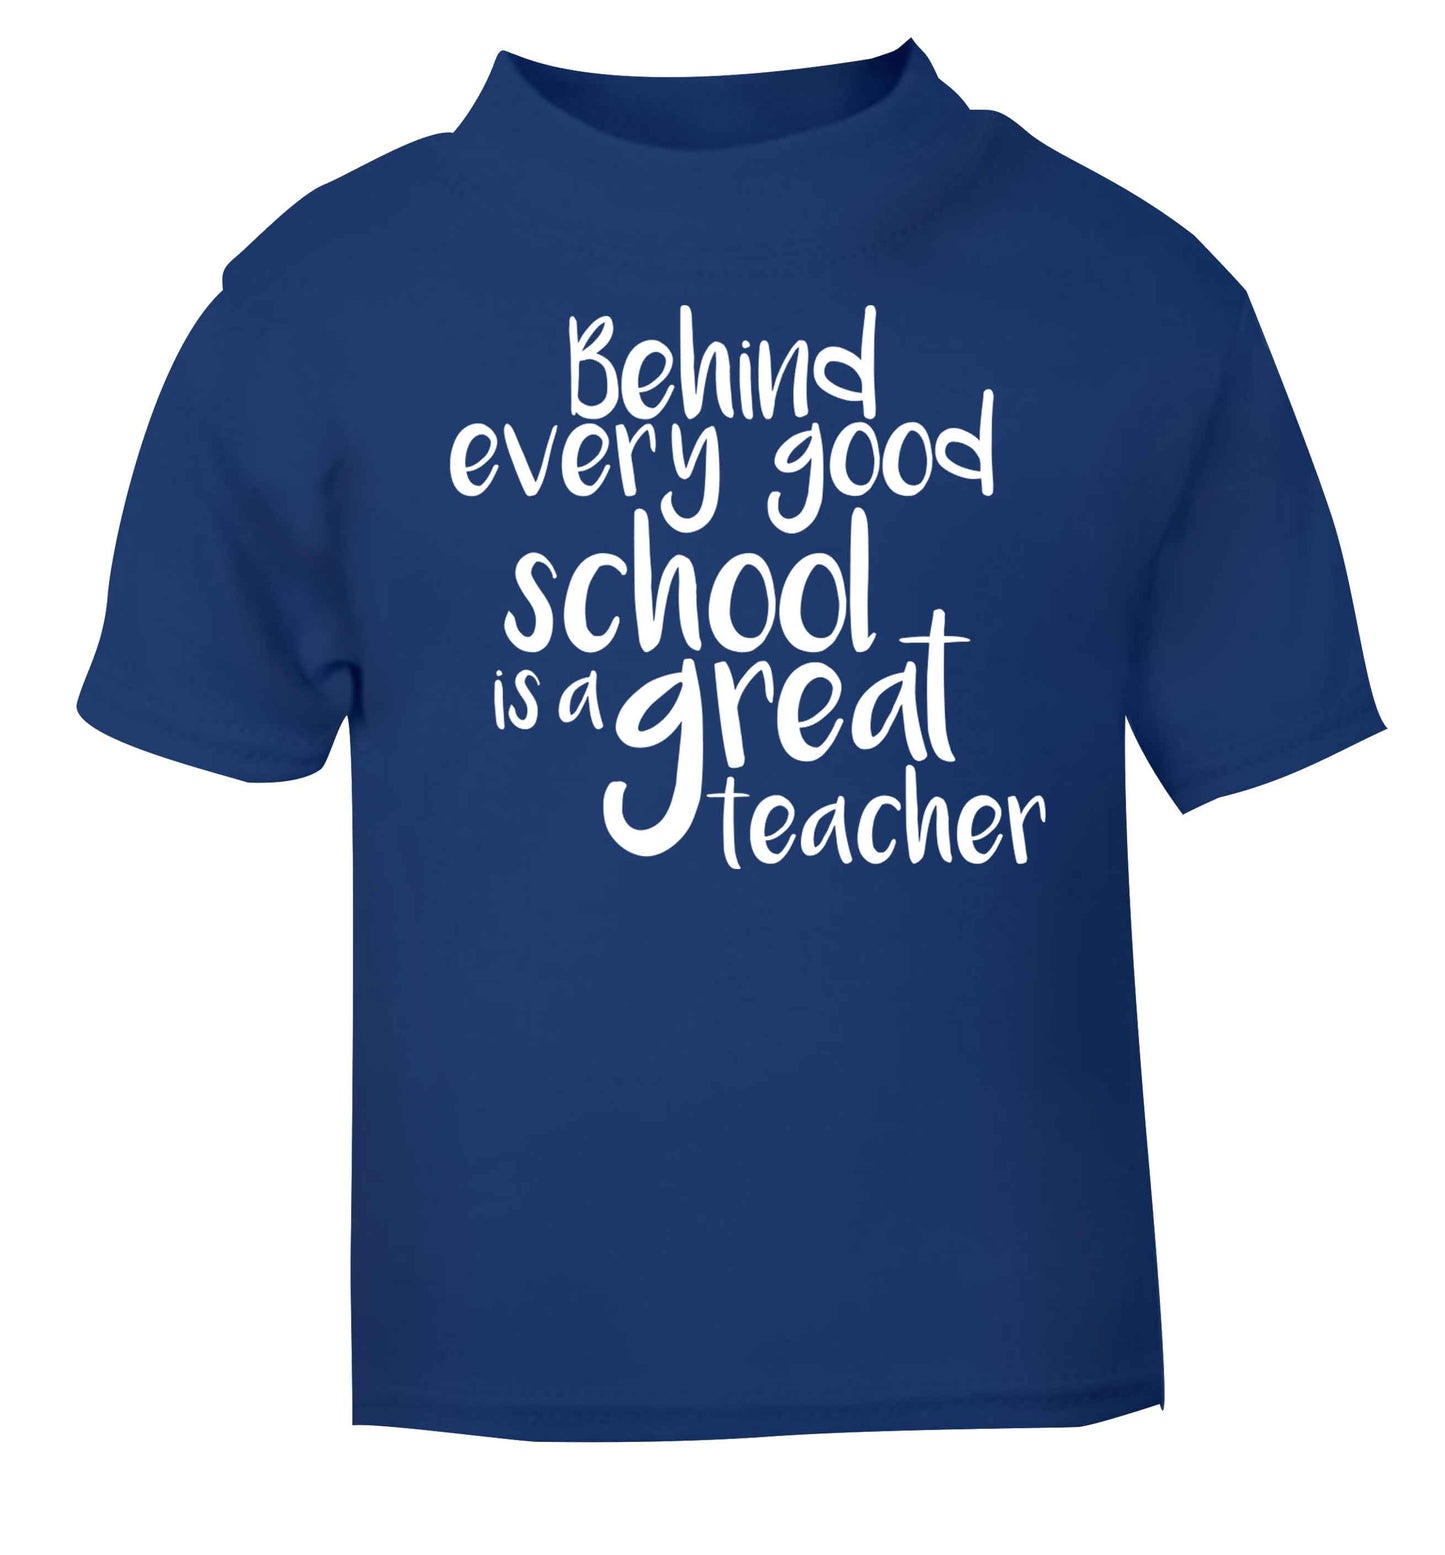 Behind every good school is a great teacher blue baby toddler Tshirt 2 Years